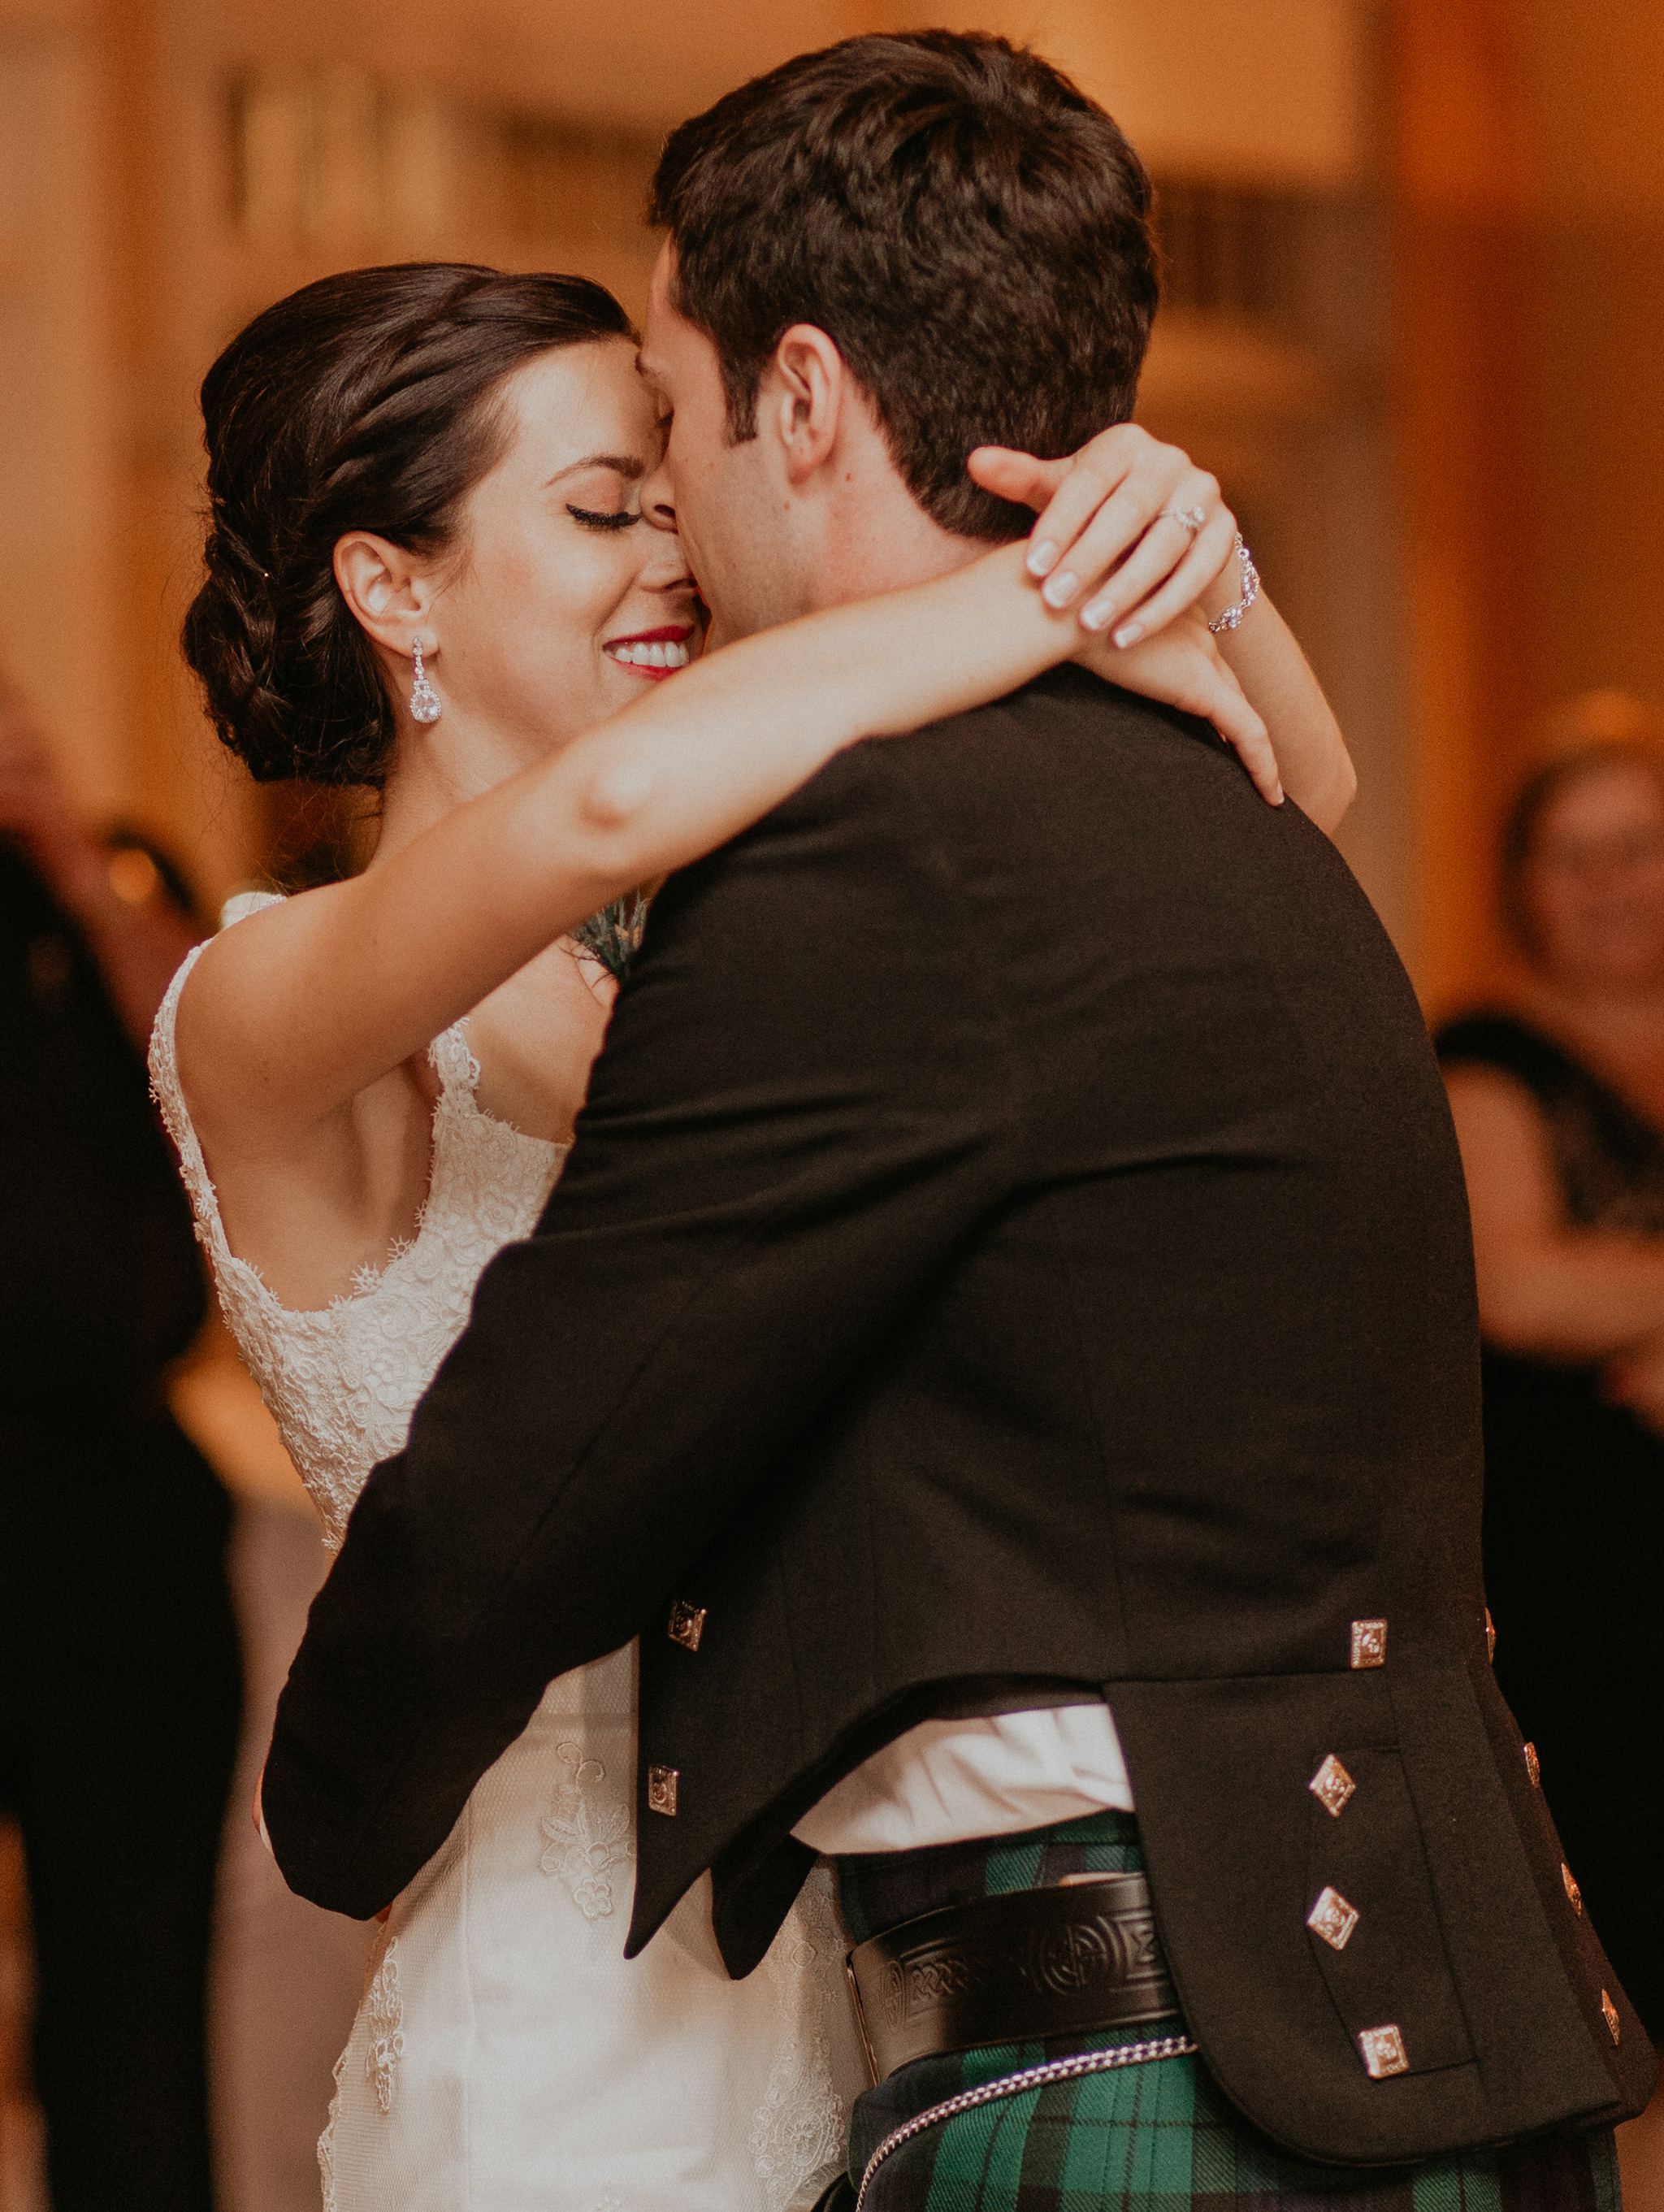 Candid photo of bride and groom hugging during first dance romantic wedding picture